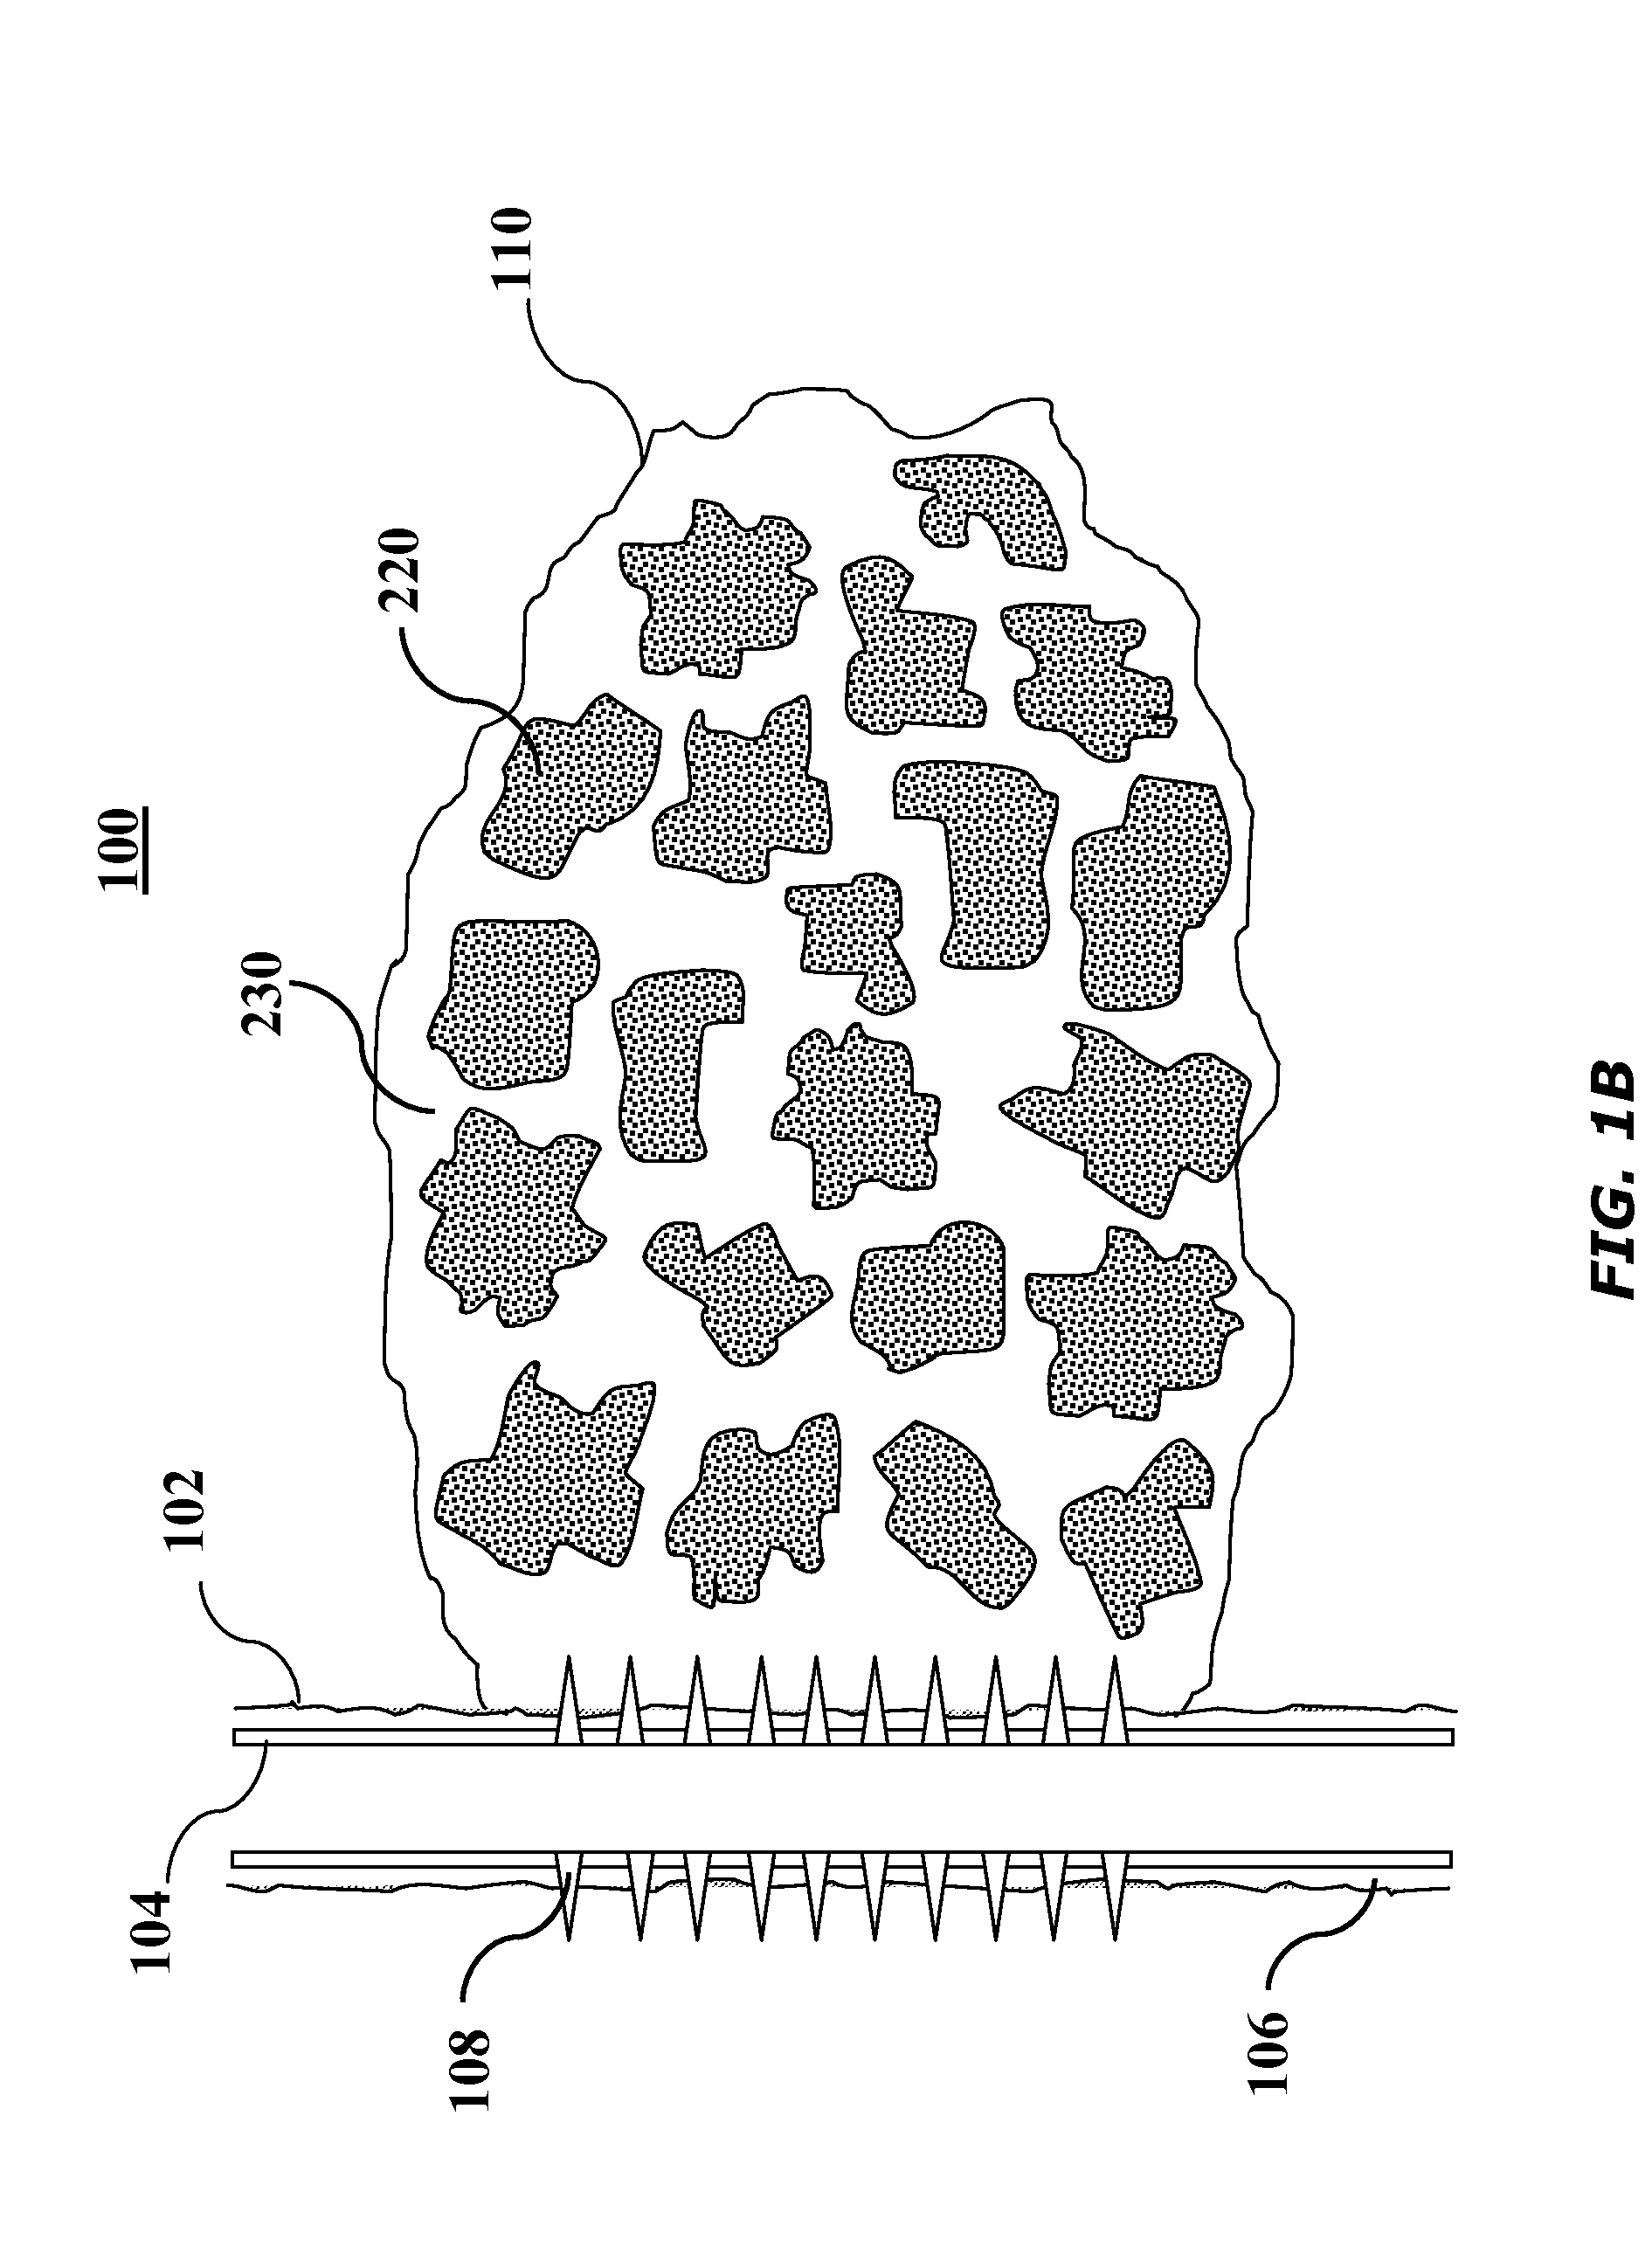 Methods of forming high-porosity fractures in weakly consolidated or unconsolidated formations